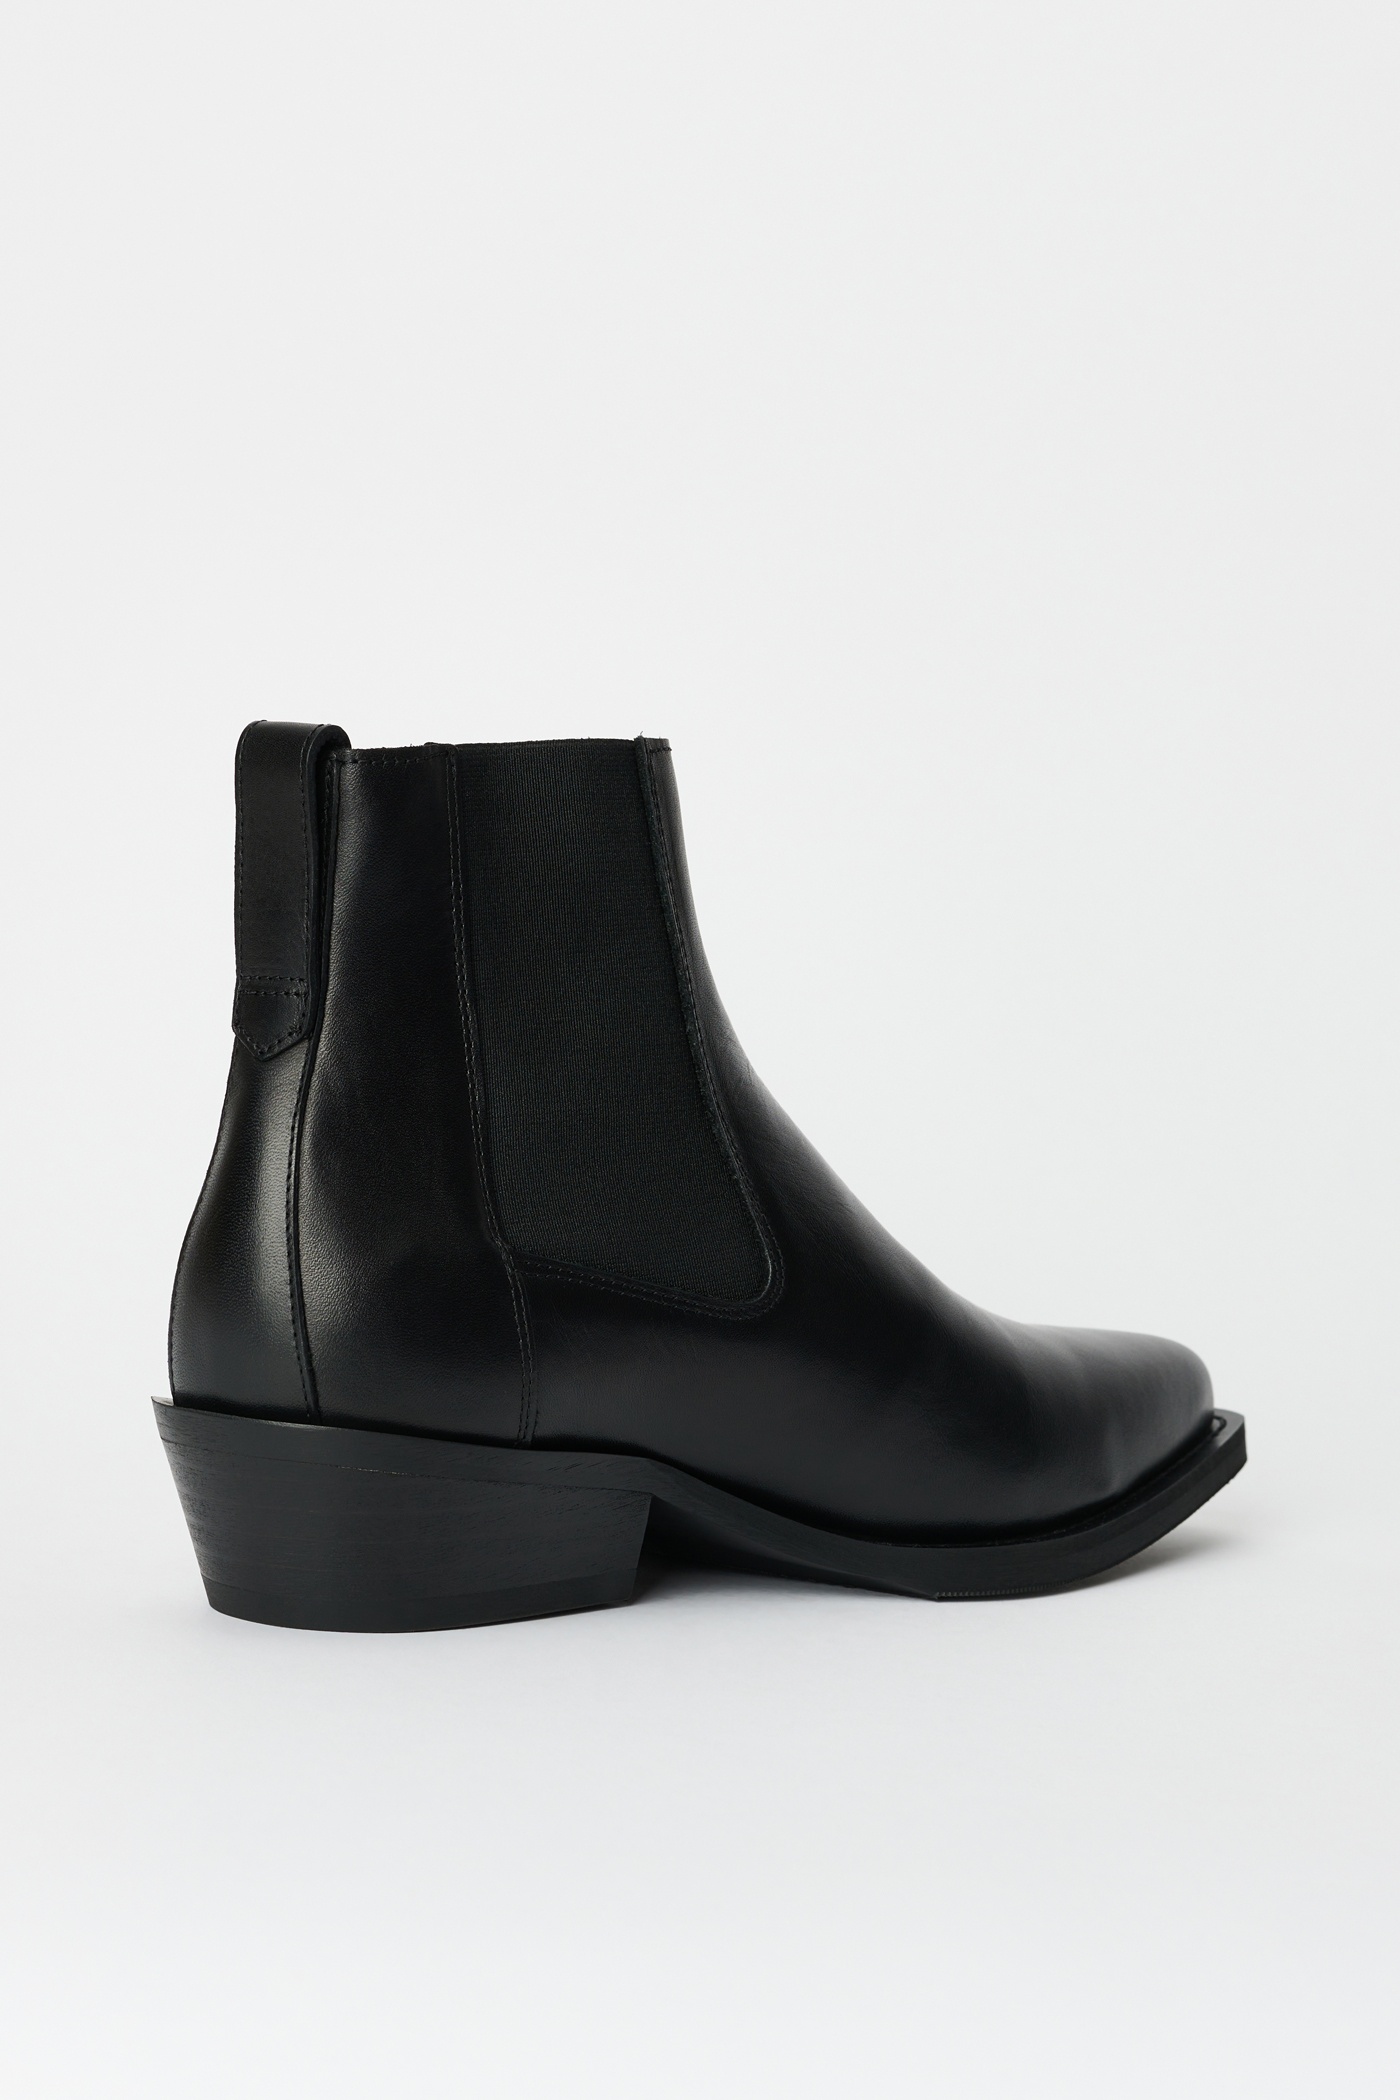 Cyphre Boot Infinite Black Leather - 4